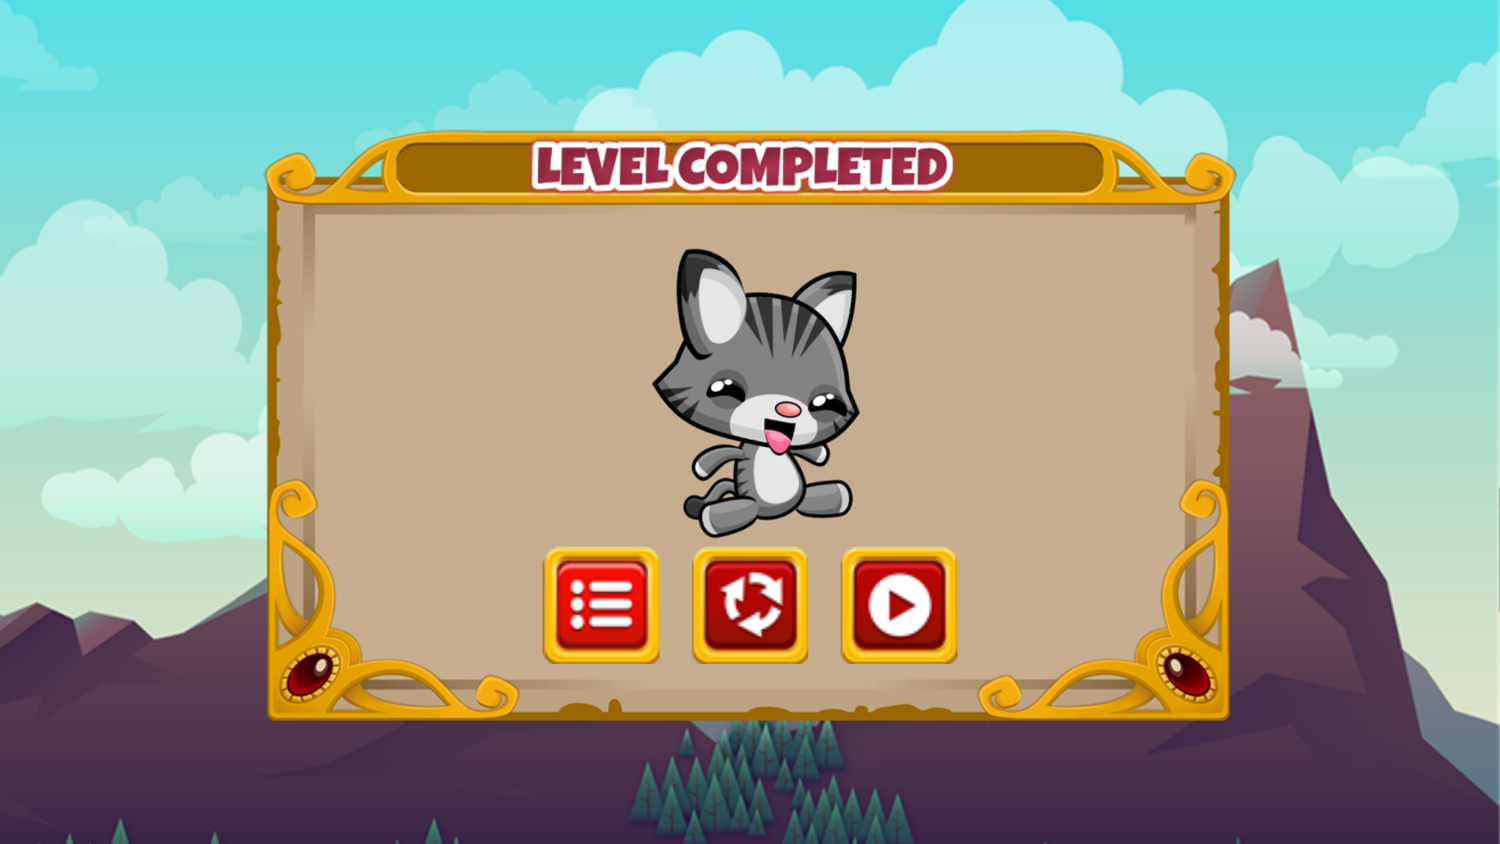 Lost Kitty Go Home Game Level Completed Screenshot.